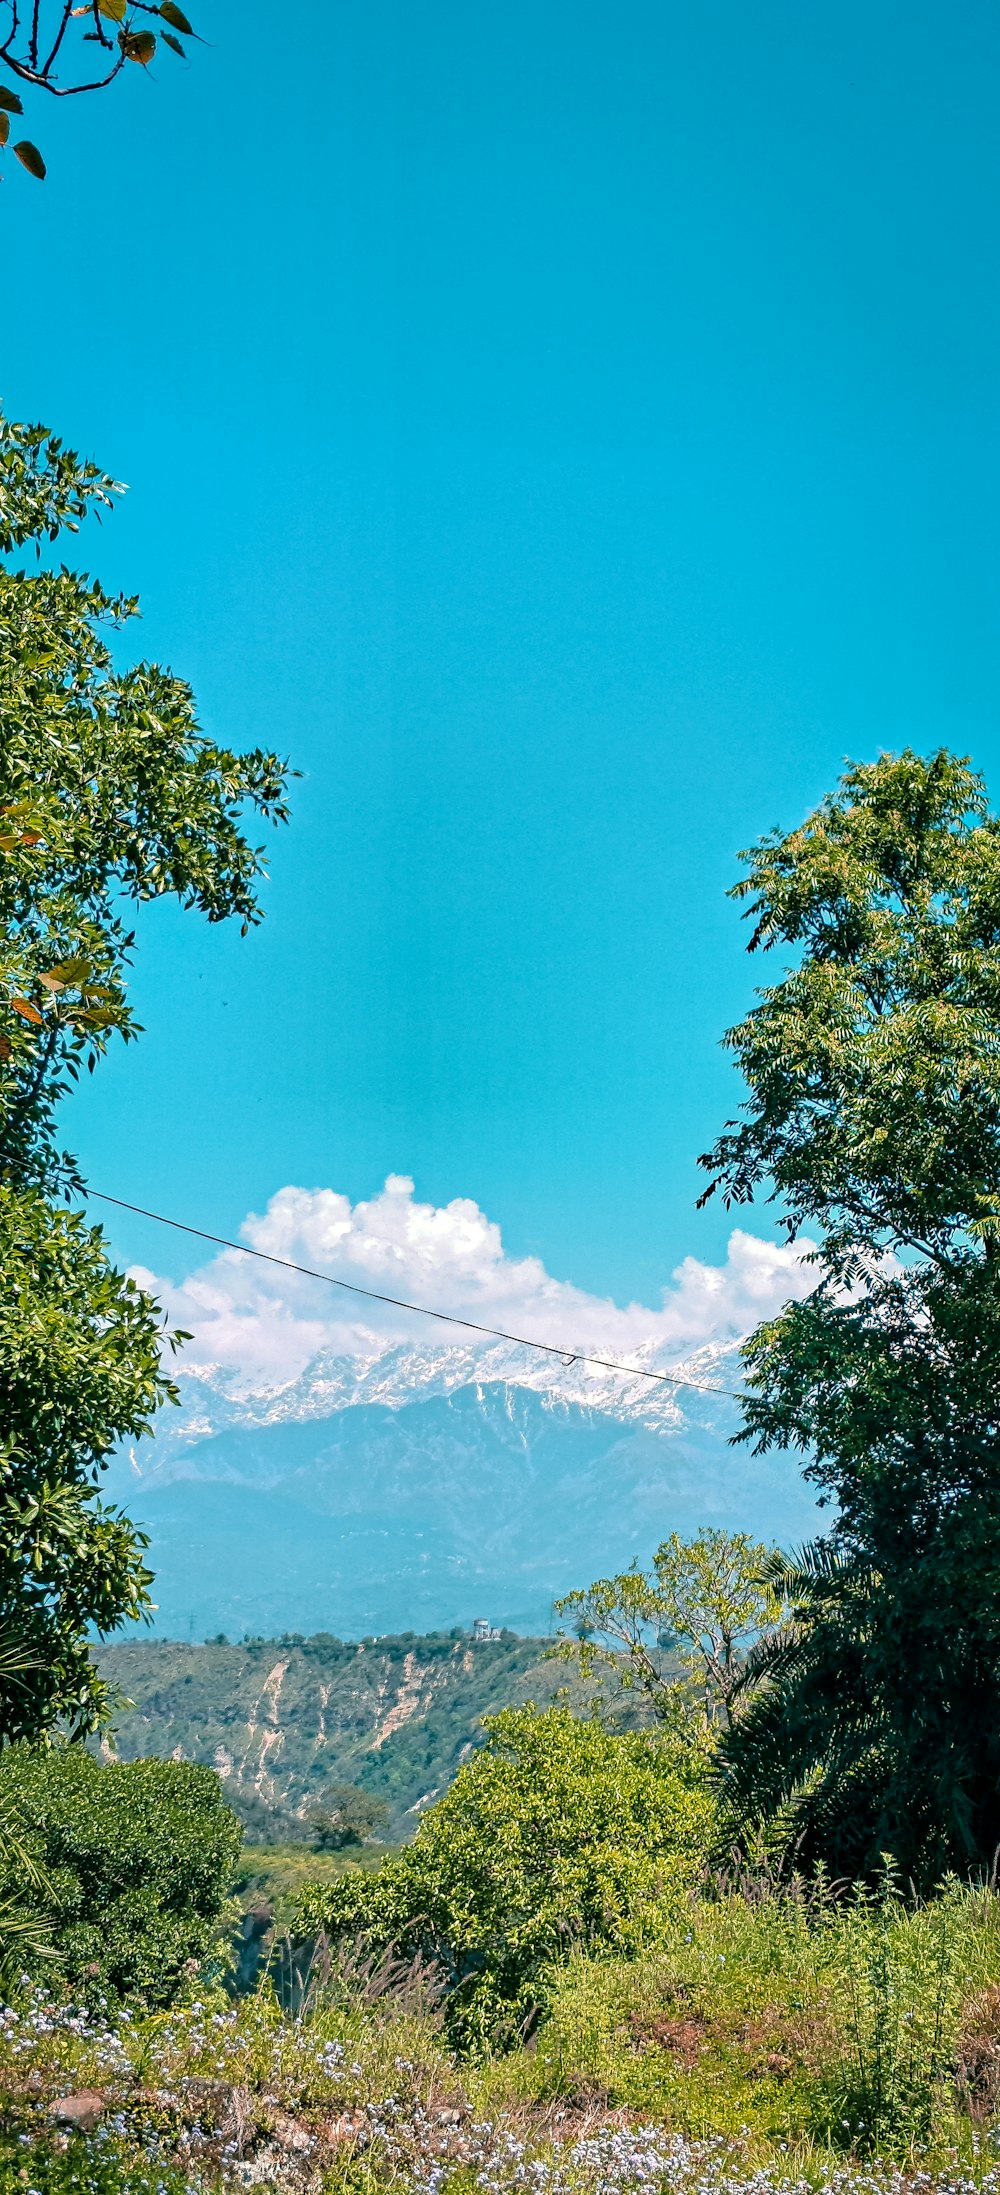 a view of a mountain range from a wooded area